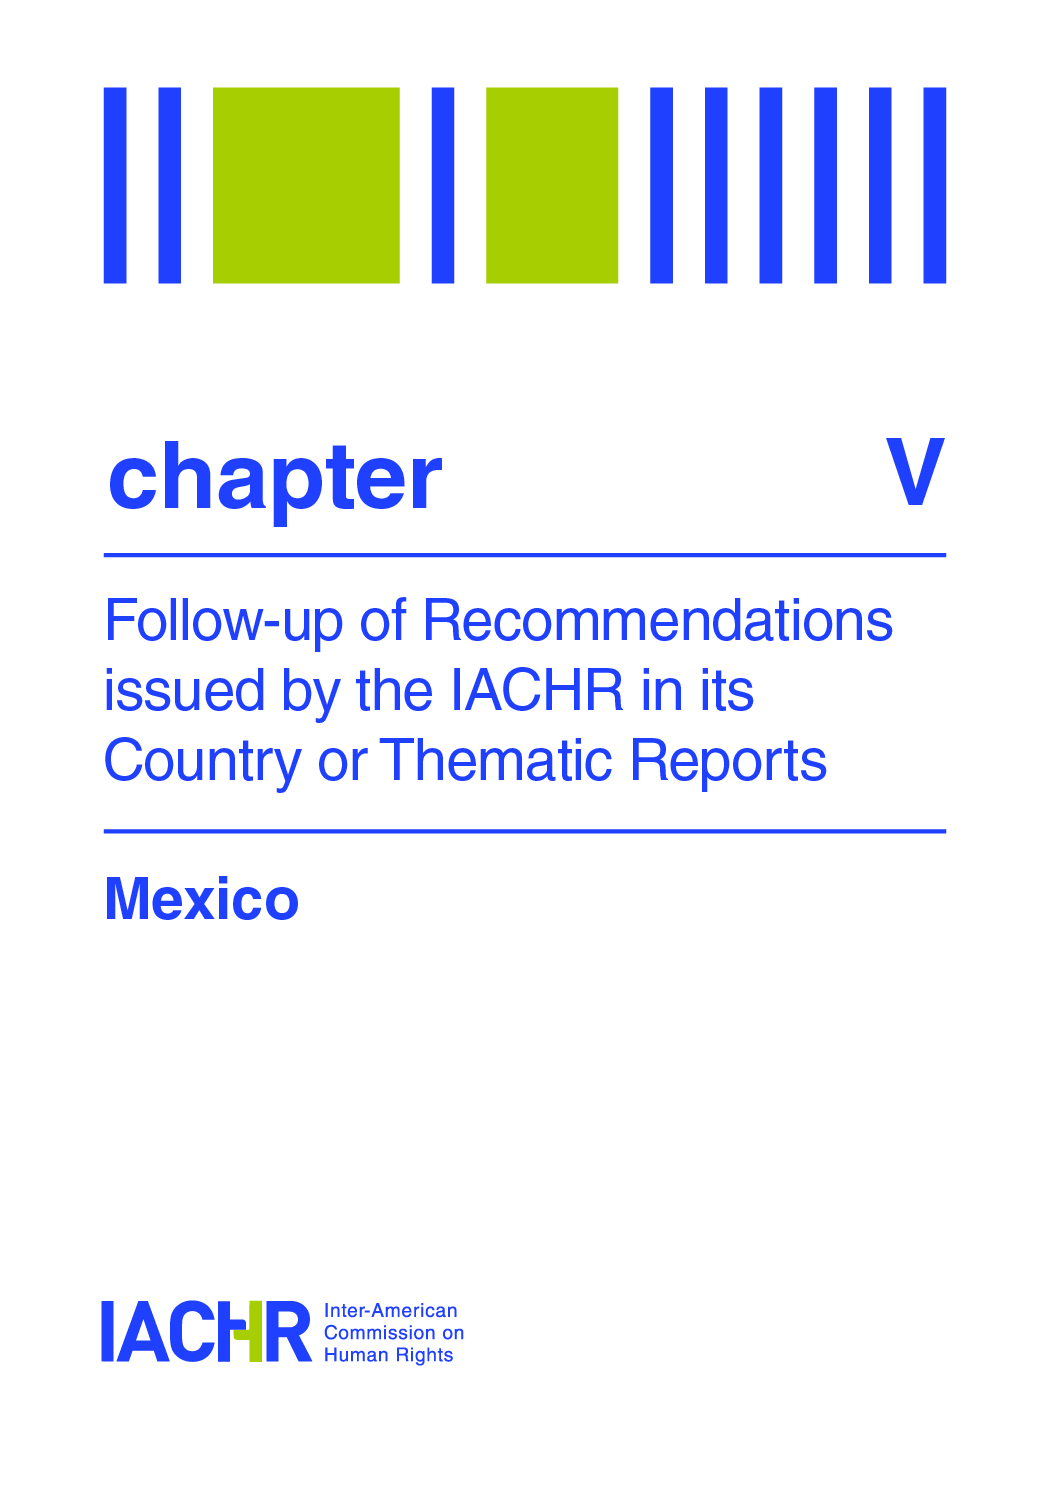 Sixth follow-up report on the recommendations made by the IACHR in the Report on the Situation of Human Rights in Mexico